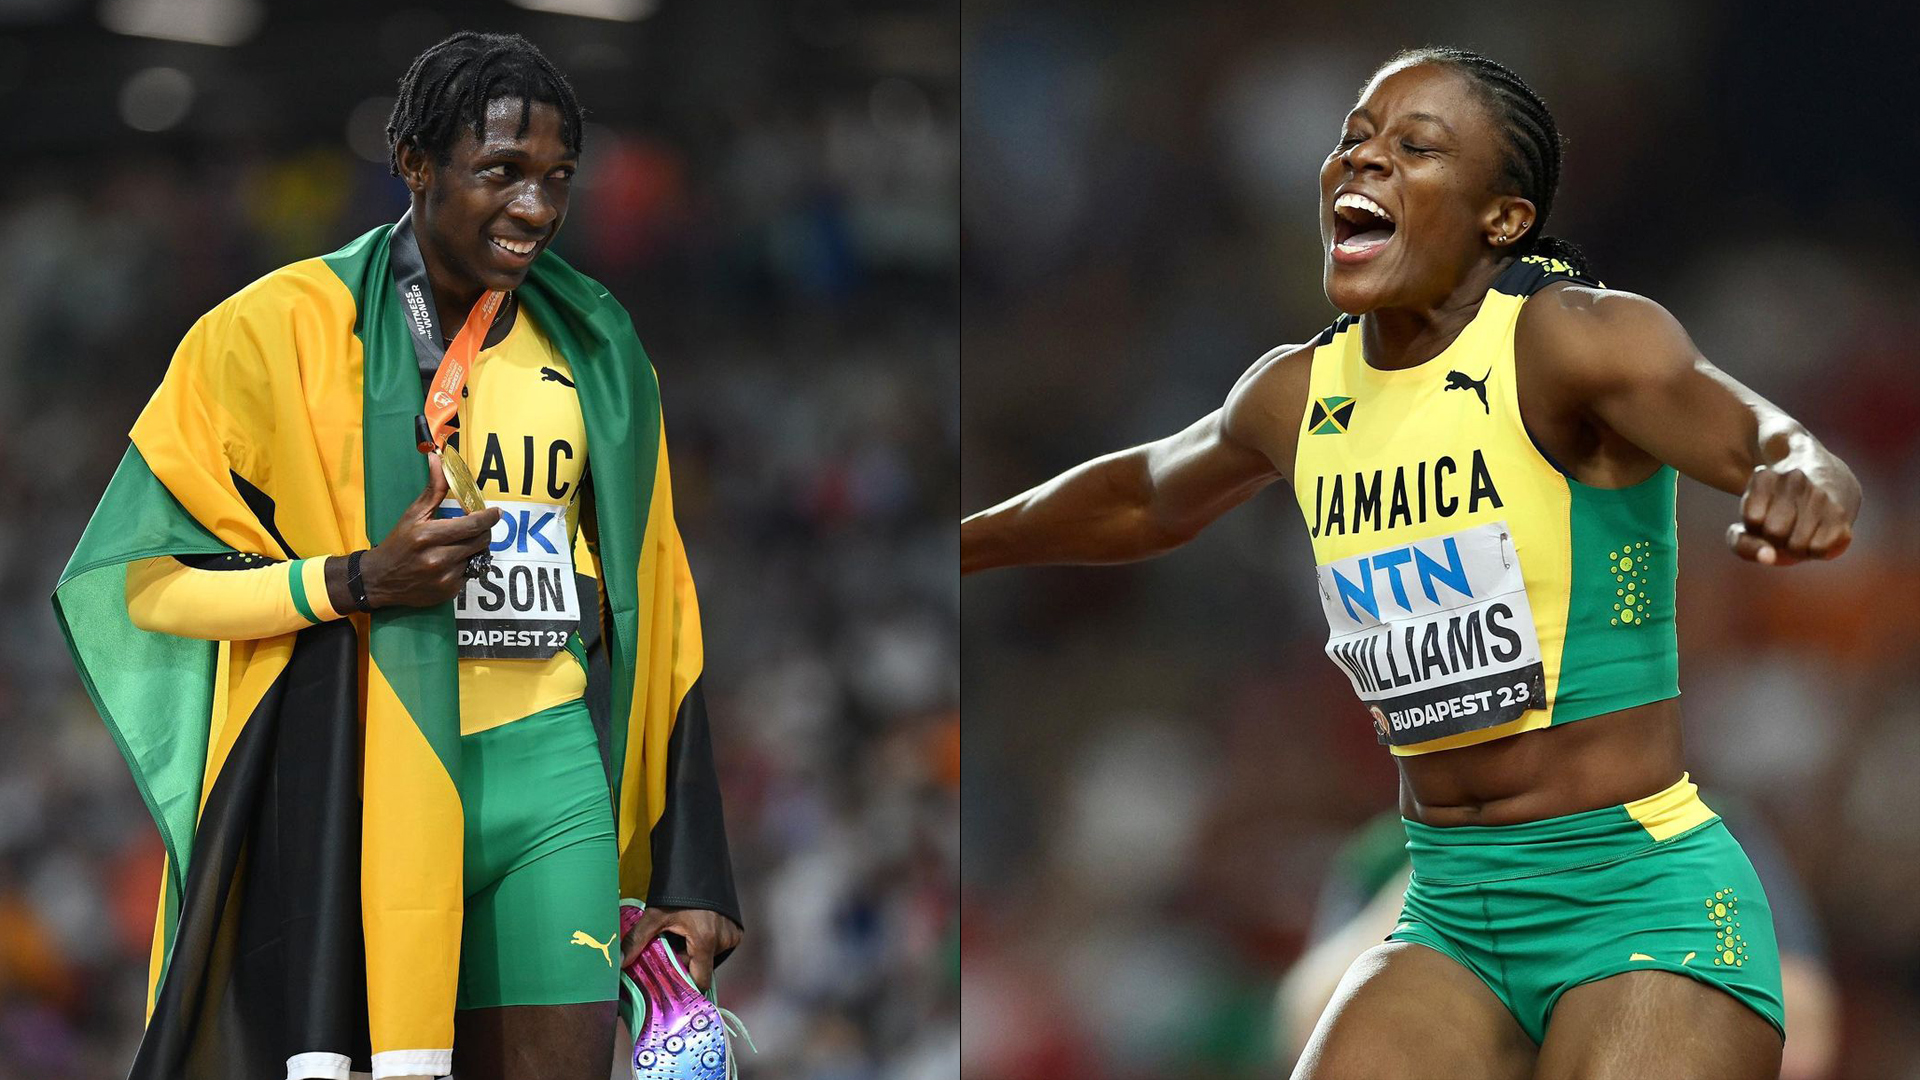 Antonio Watson and Danielle Williams delivered two of the most remarkable performances on the sixth day of Thursday (24 Aug), leading the way for five Jamaican medals at the World Athletics Championships Budapest 23.